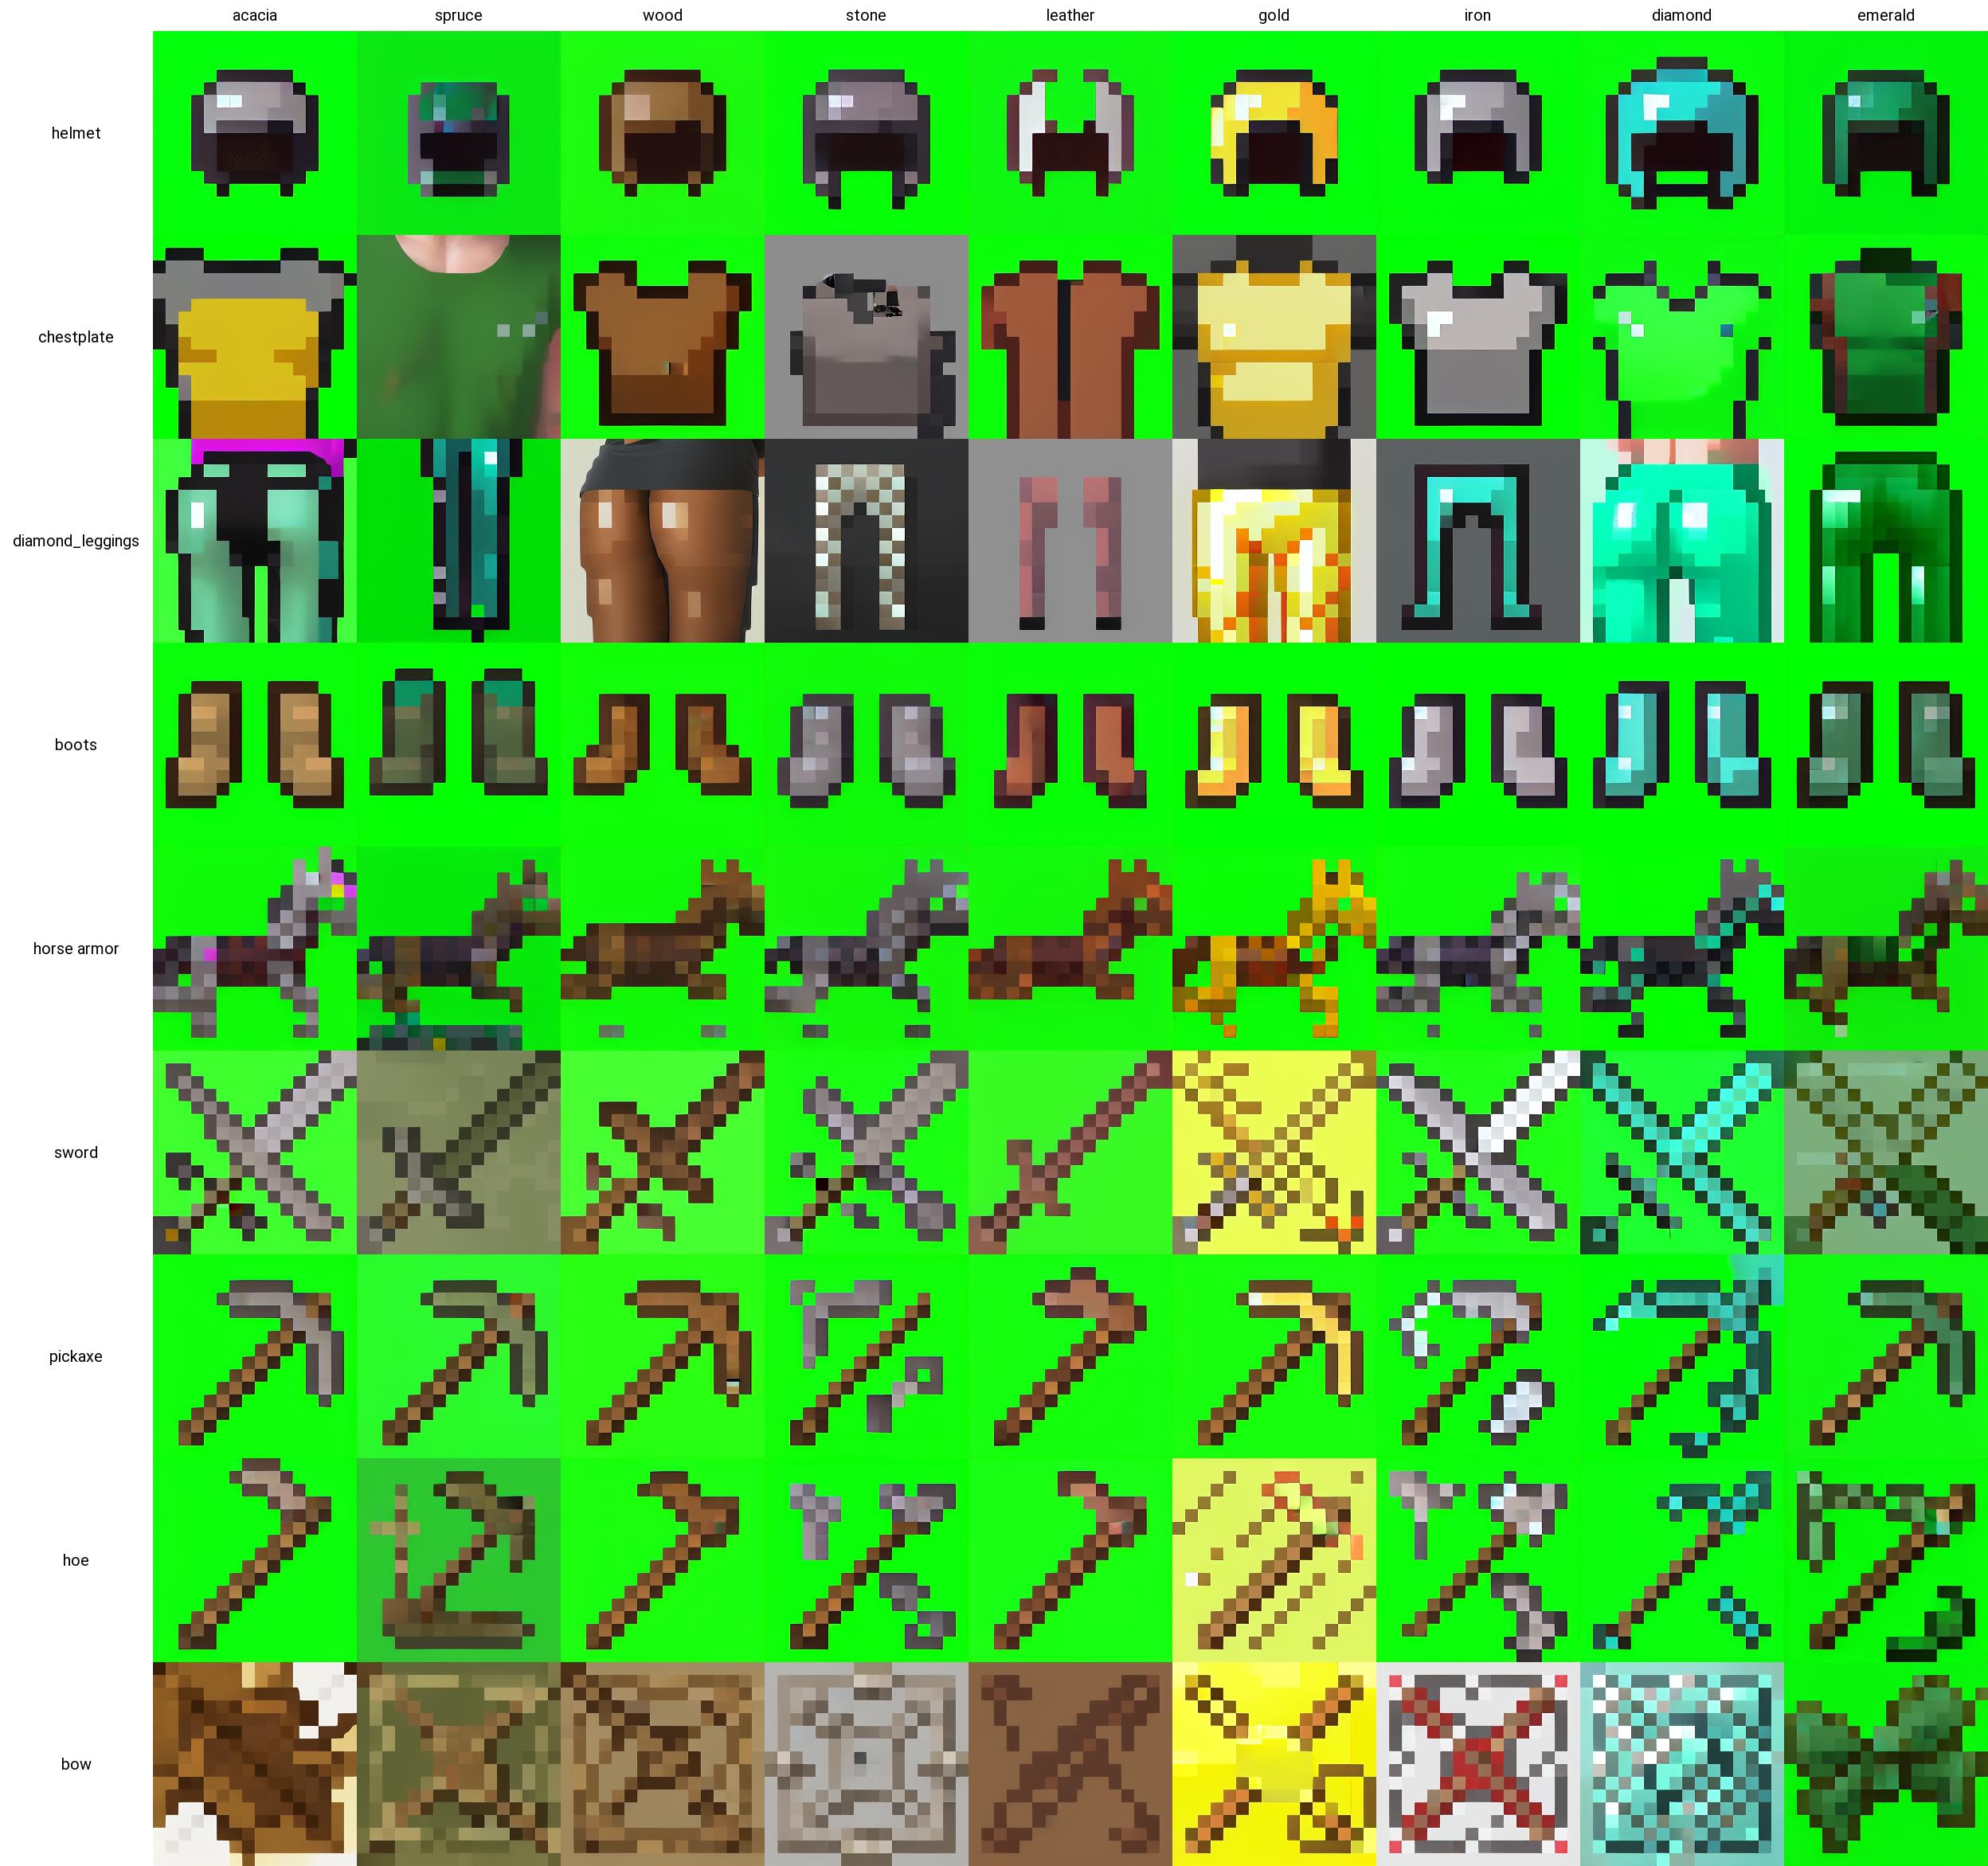 Minecraft Items 1.12.2  image by pymess508